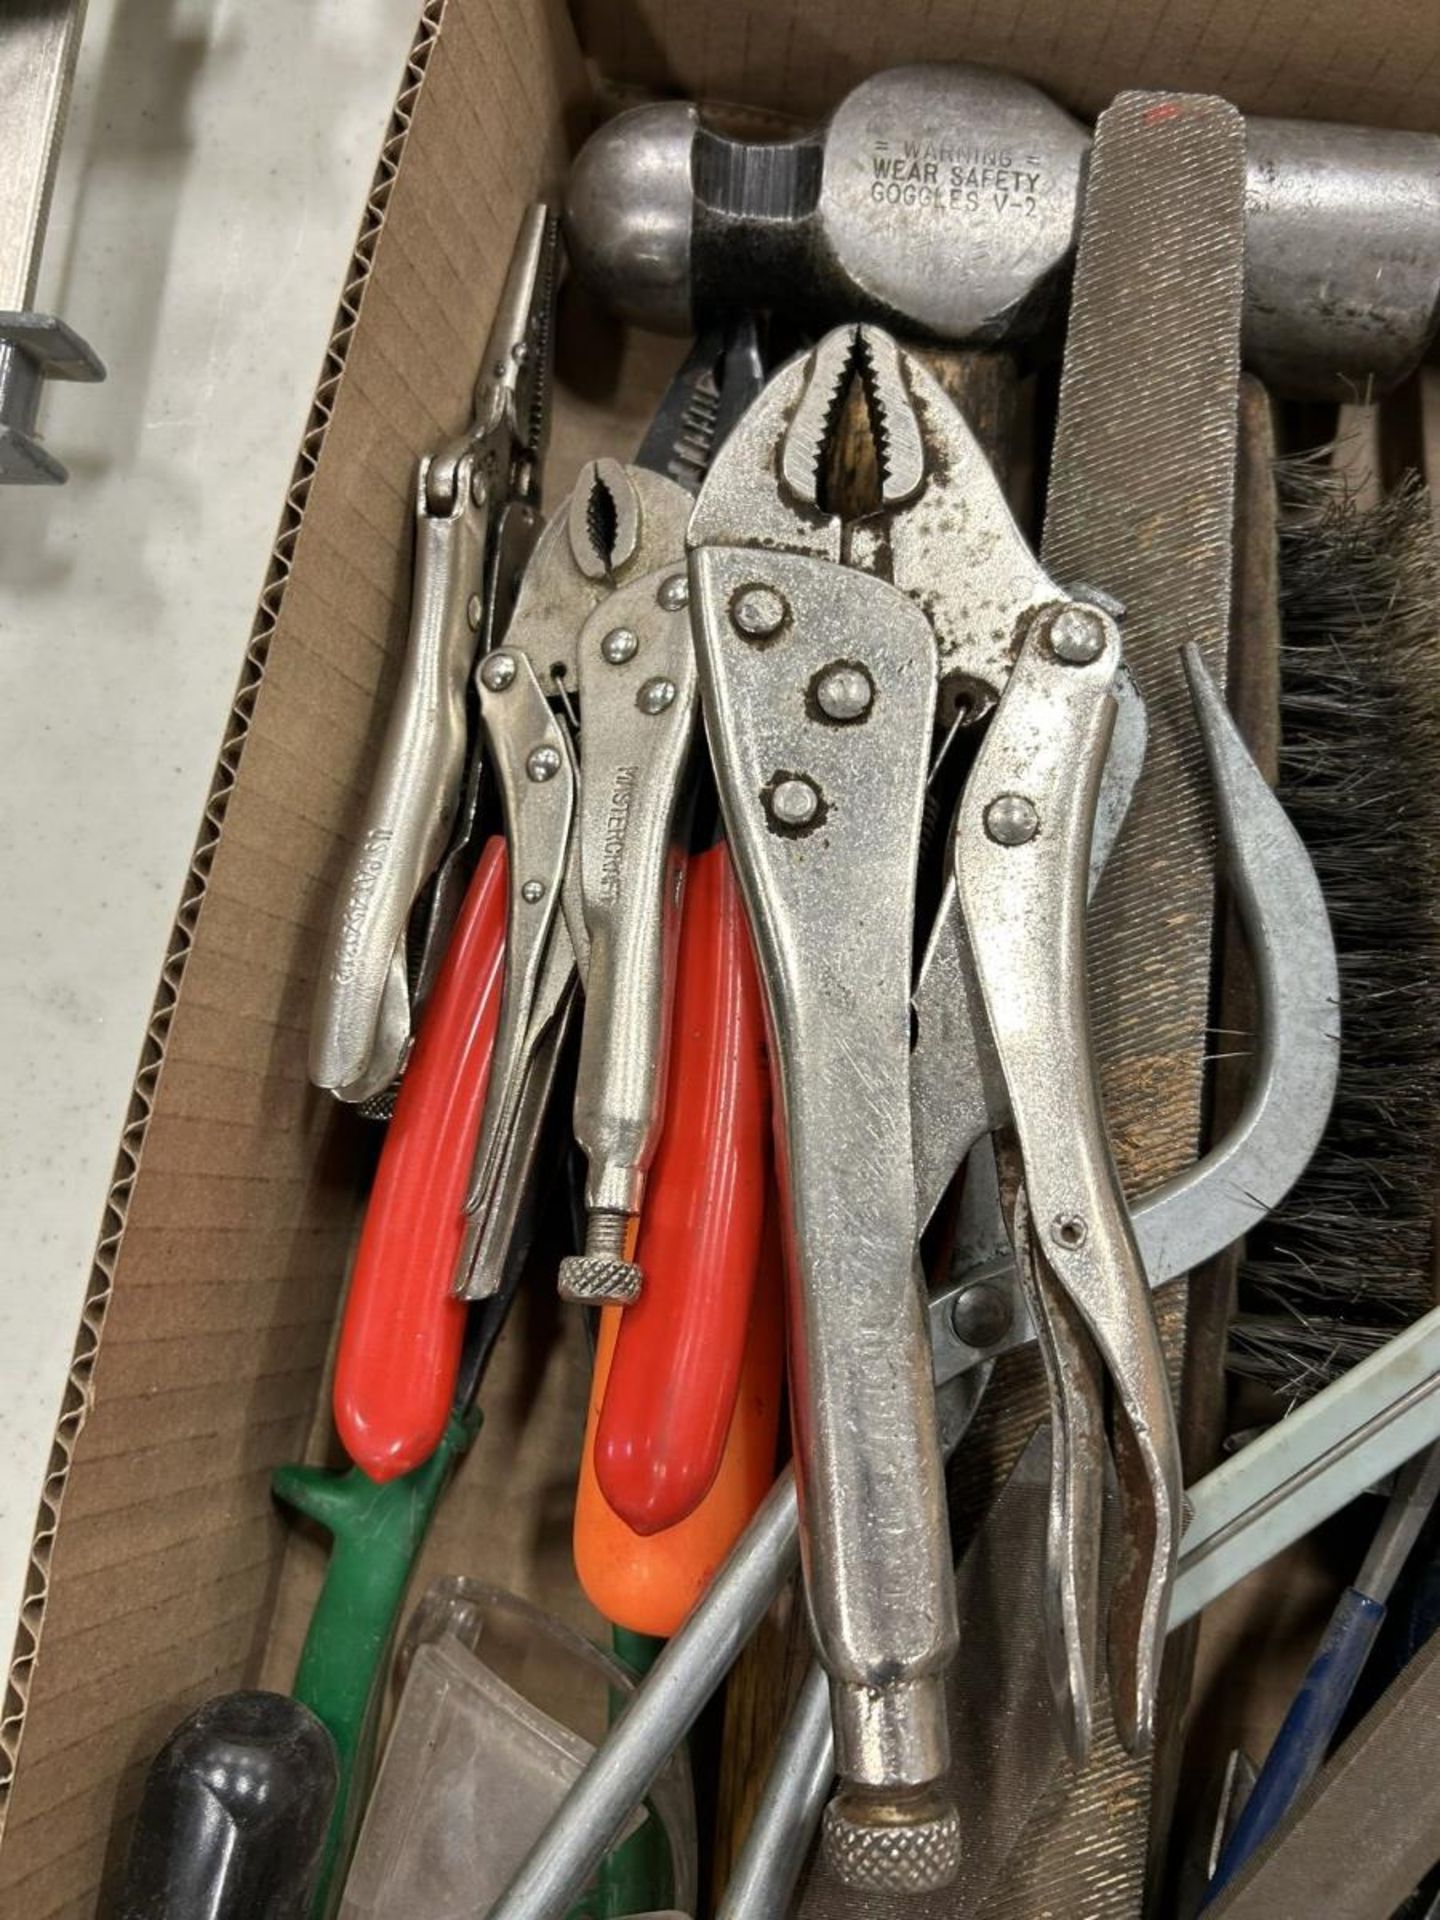 L/O ASSORTED HAND TOOLS- PRY BARS, HAMMERS, WIRE STRIPPER PLIERS - Image 2 of 3